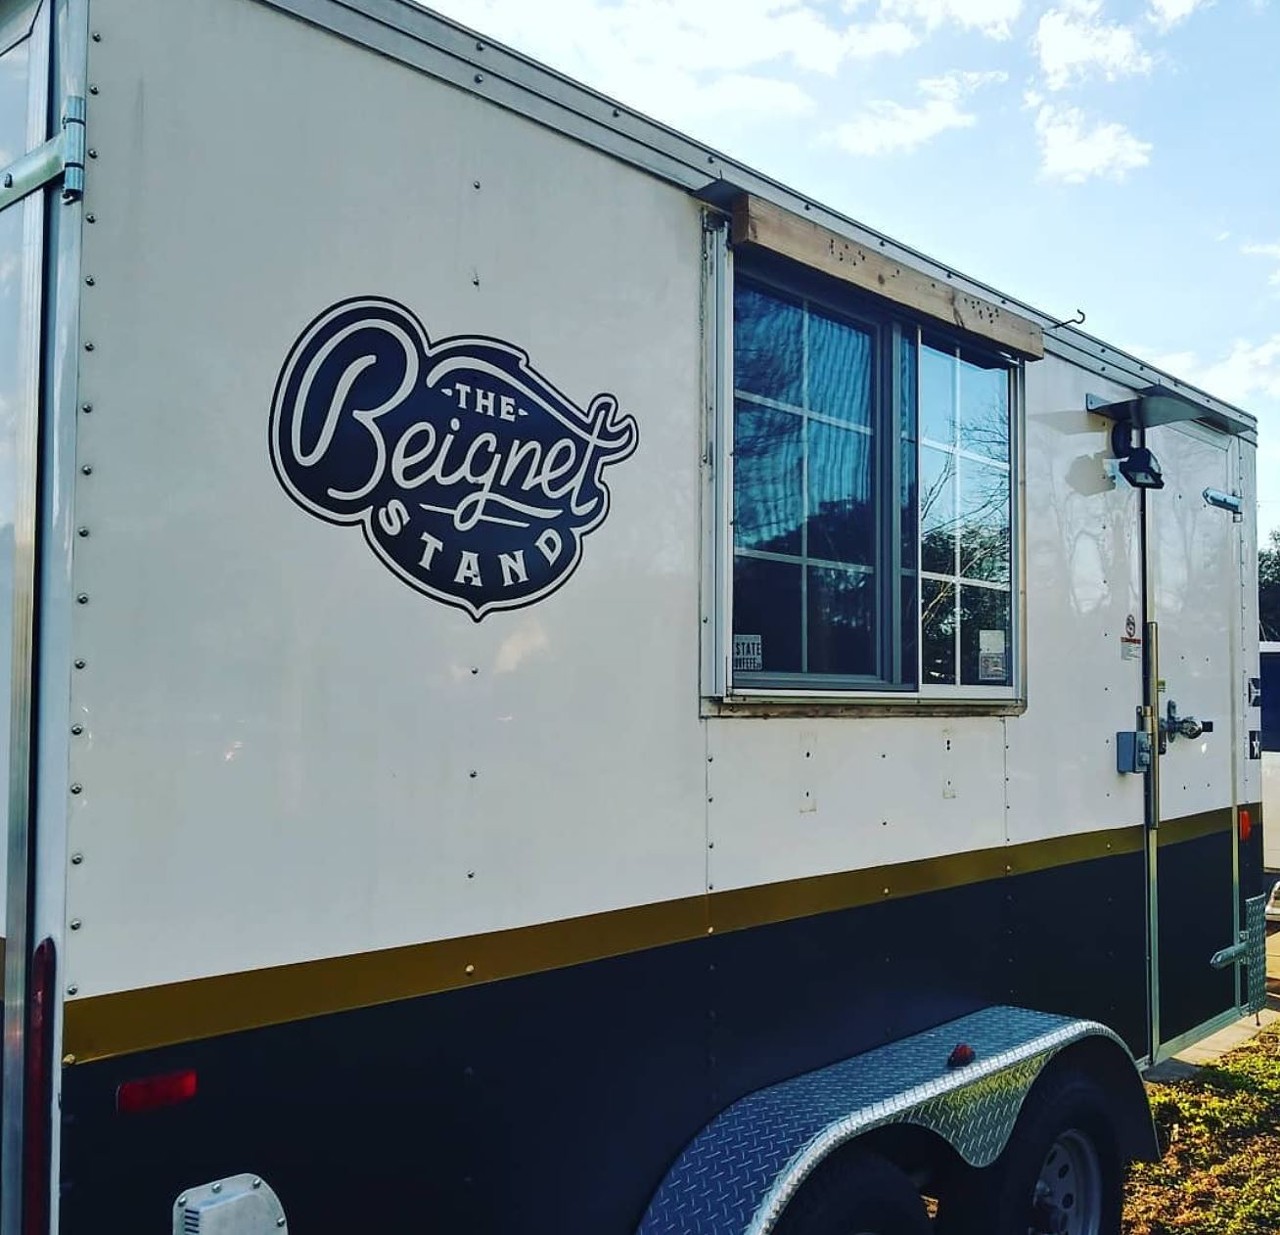 The Beignet Stand
facebook.com
The Beignet Stand, opened by two beignet lovers with a dream, makes these delicious fried breads the star of its menu. For those of you who don’t know what a beignet is, let us explain: heaven. Now go try one.
Photo via Instagram / thebeignetstand